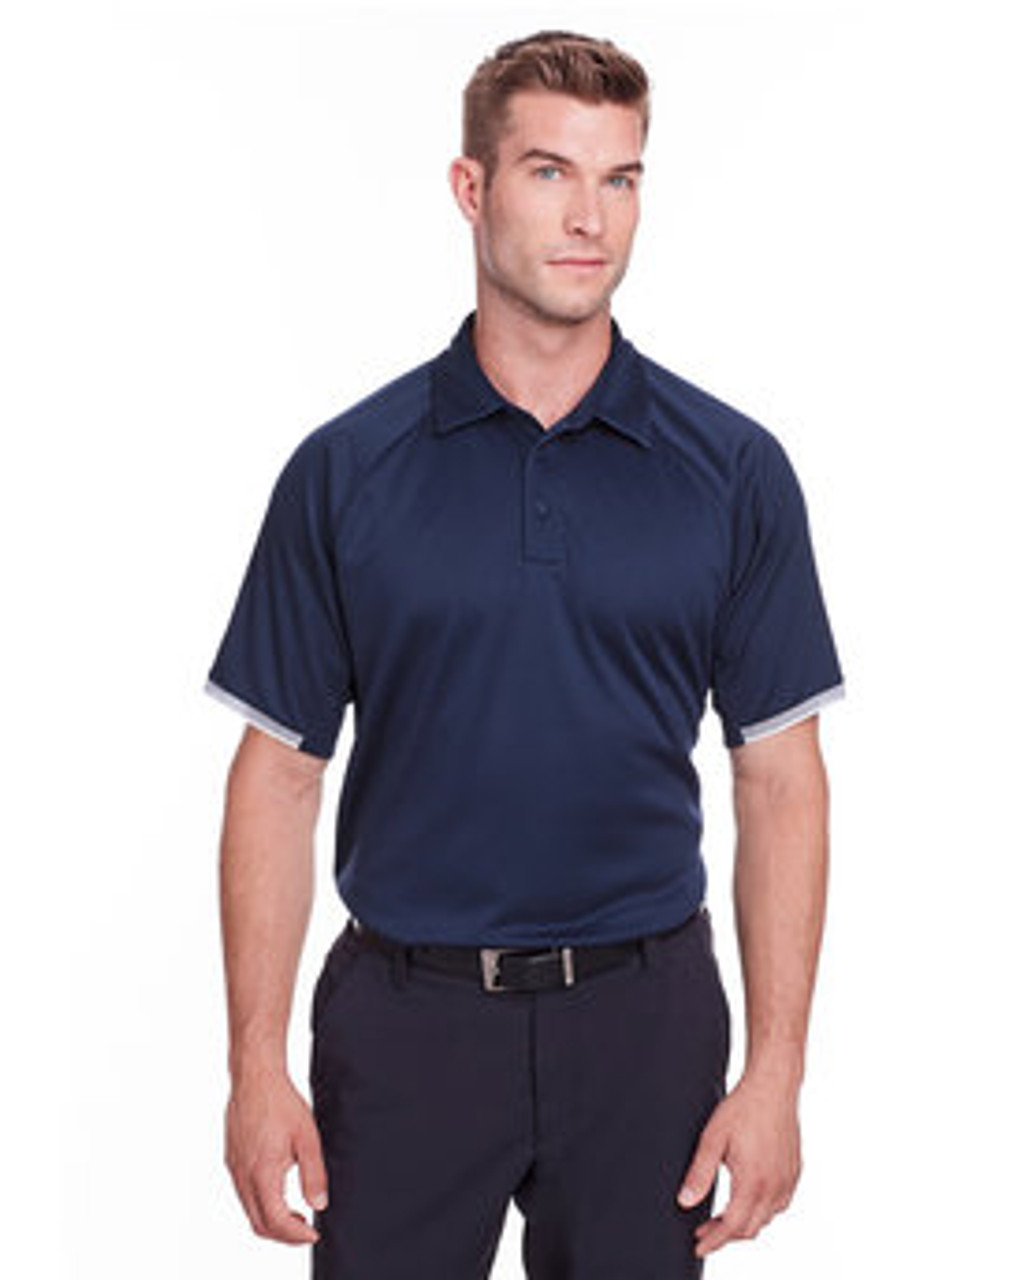 Under Armour Mens Corporate Rival Polo 1343102 MDNIGHT NVY _410